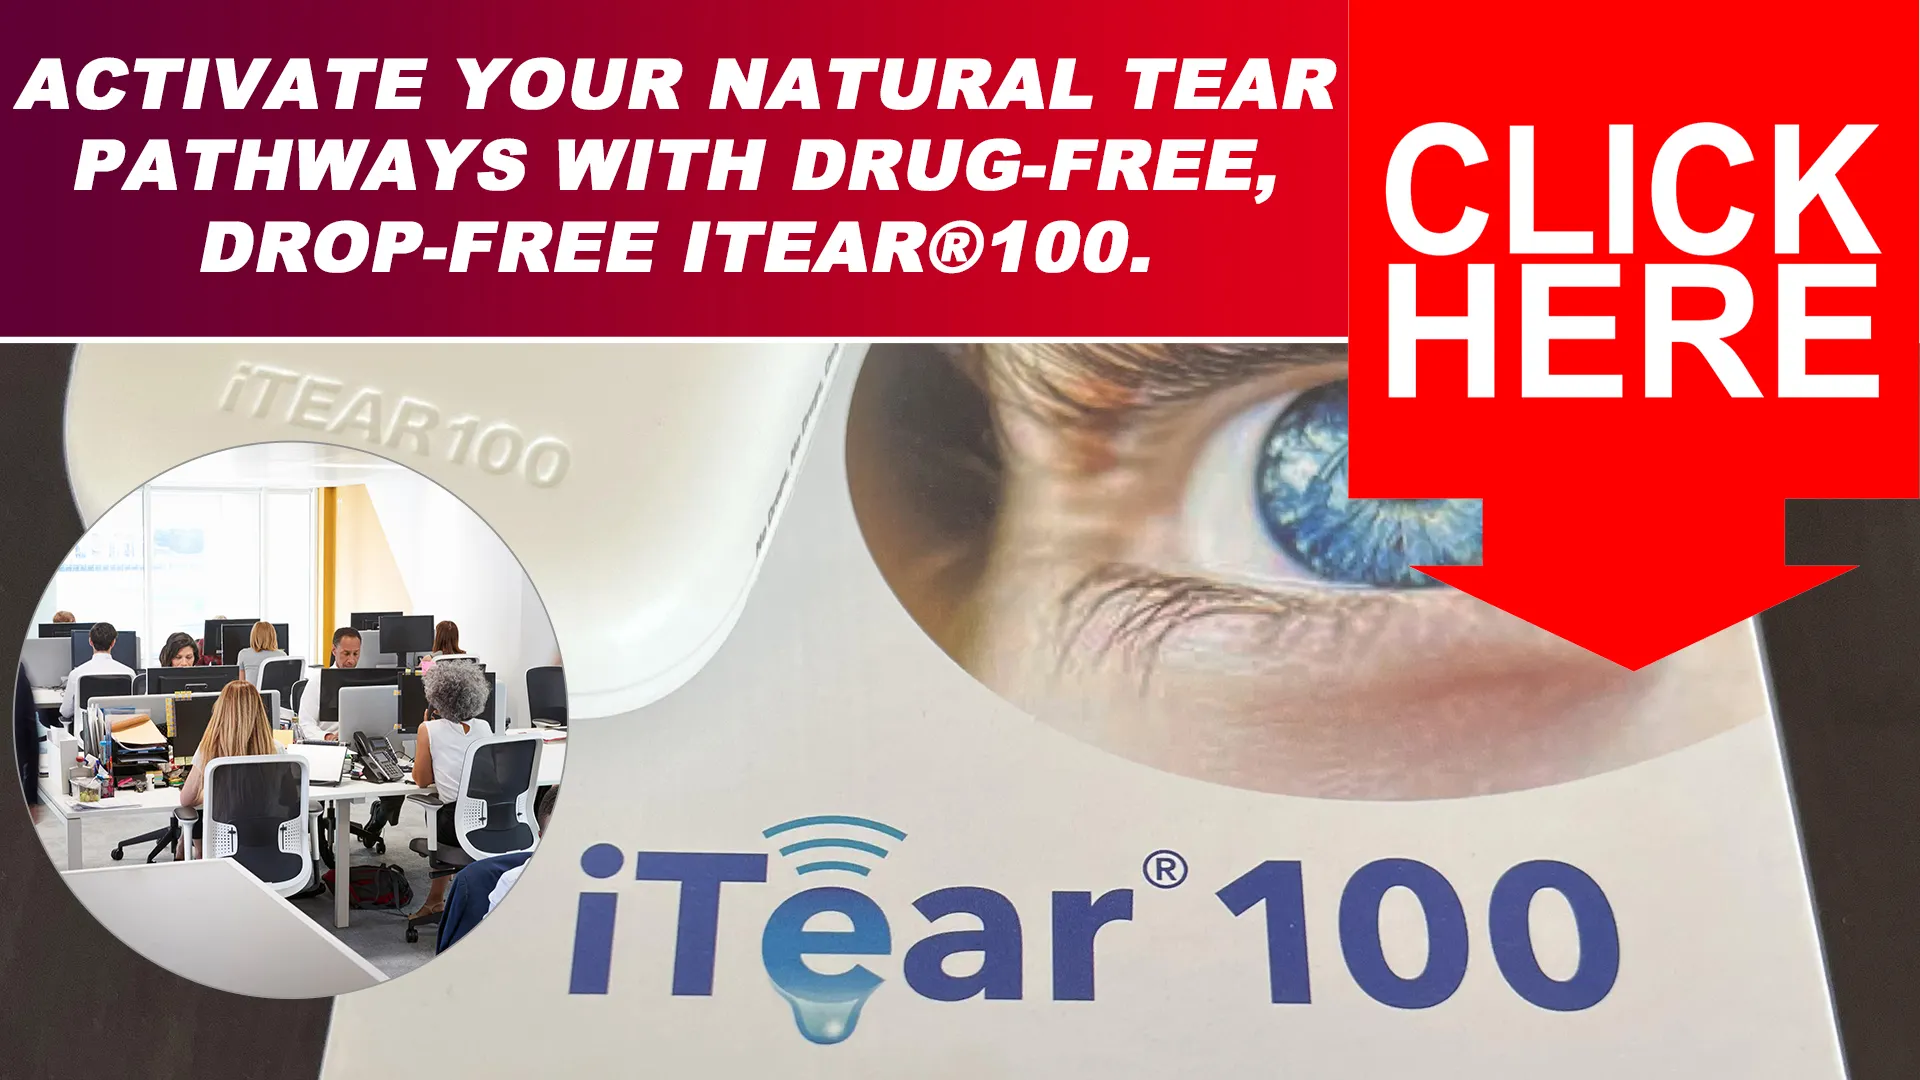 Experience Quick Relief with iTear100